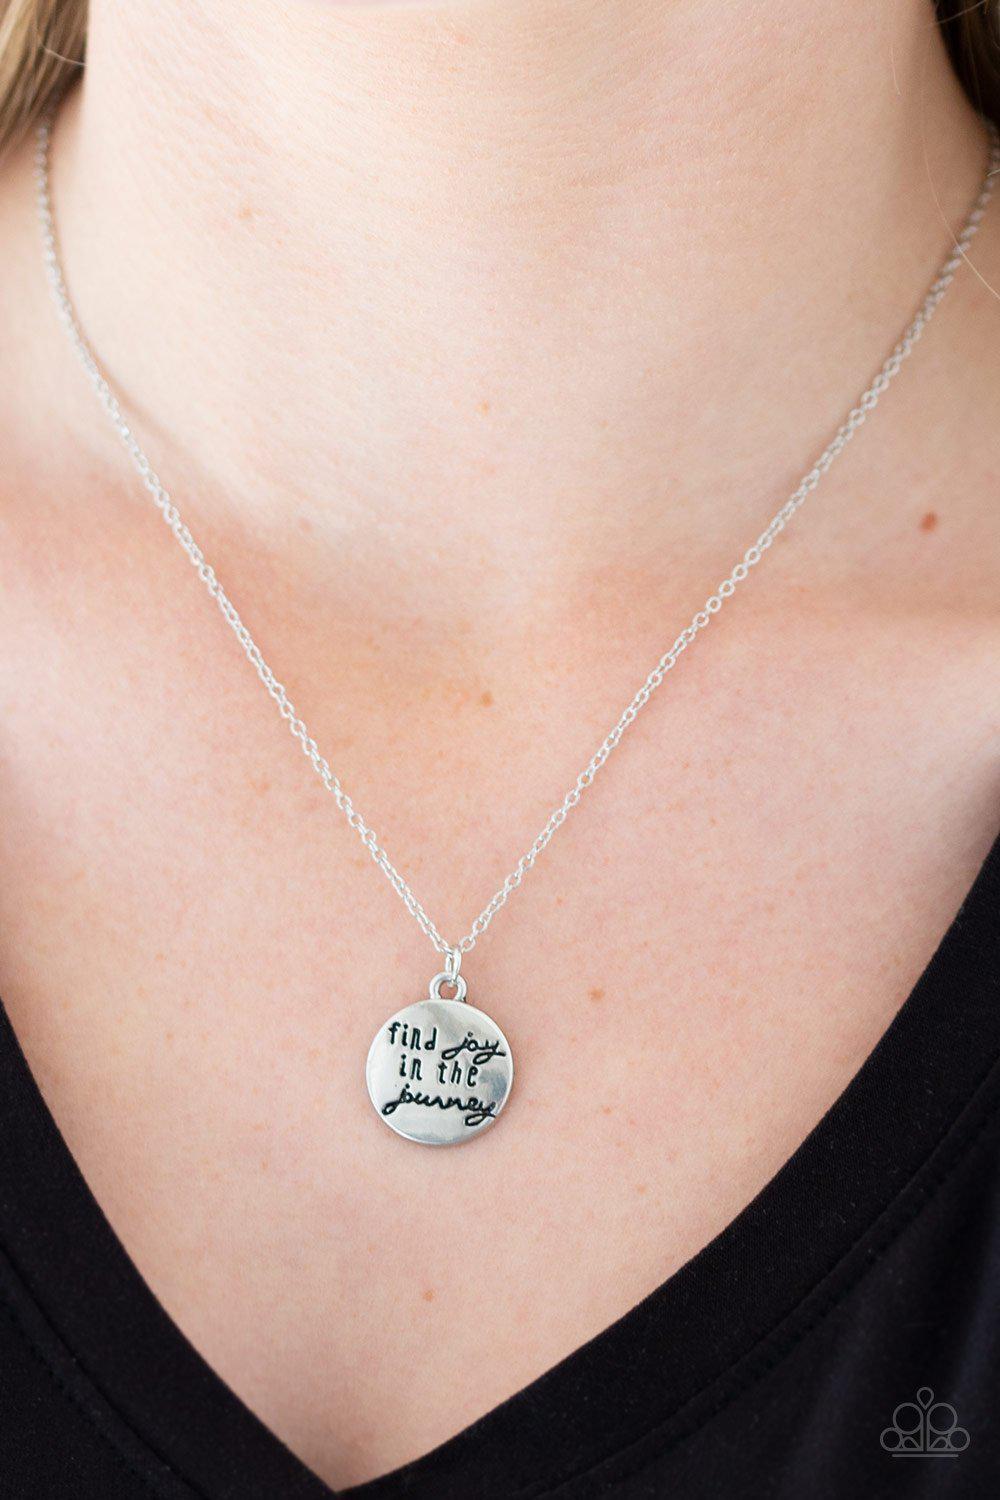 Find Joy Silver Inspirational Necklace - Paparazzi Accessories - model -CarasShop.com - $5 Jewelry by Cara Jewels